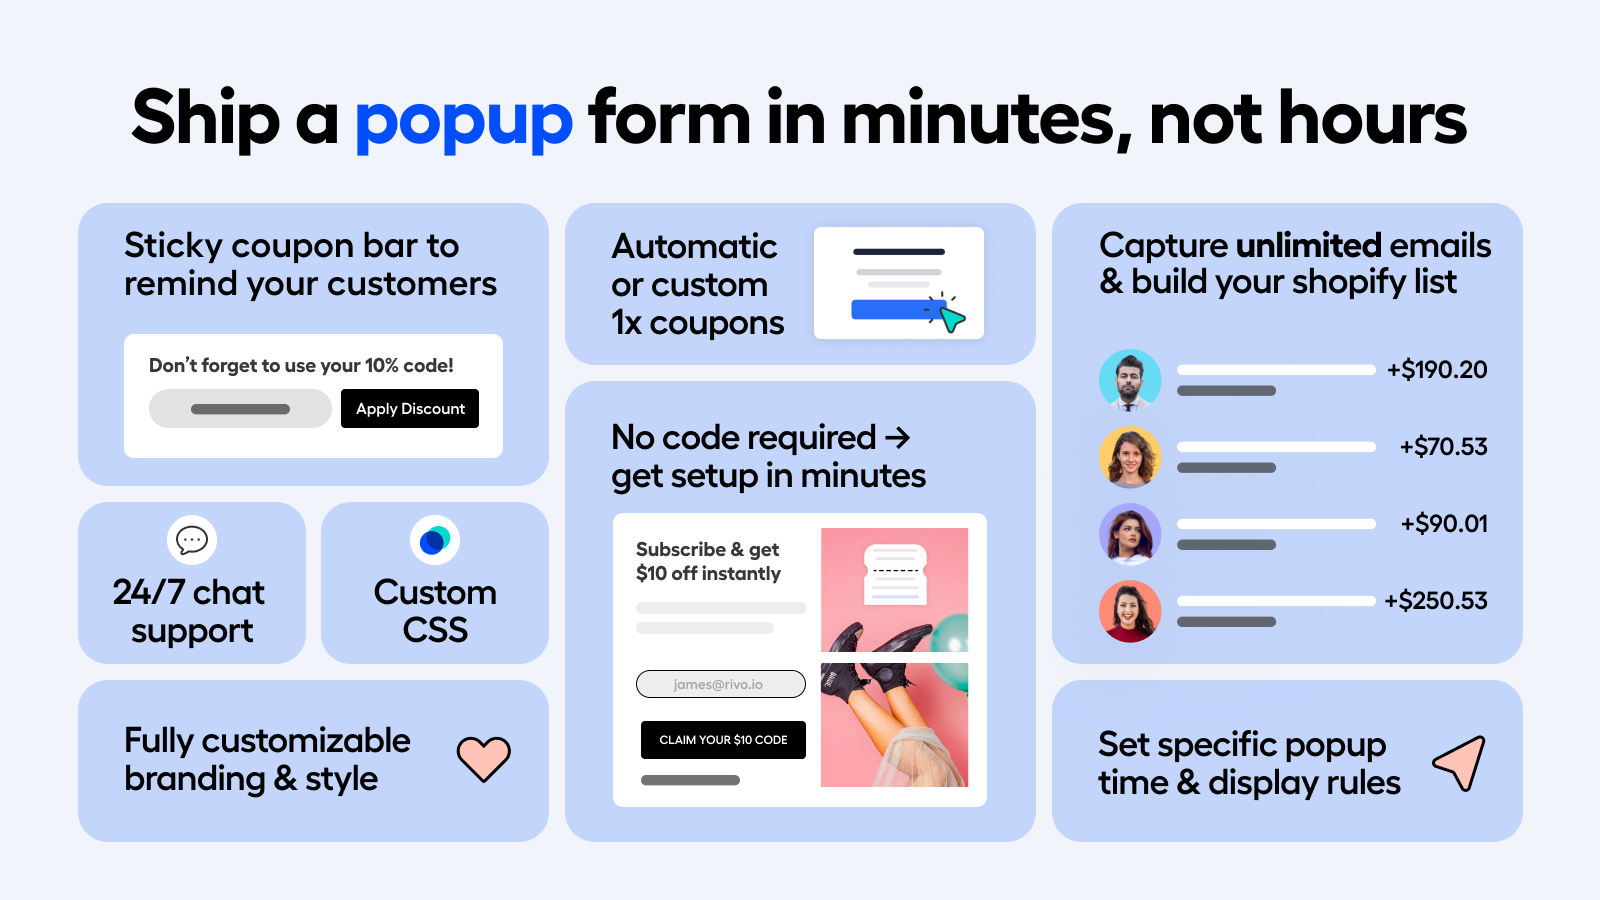 Ship a popup form in minutes, not hours